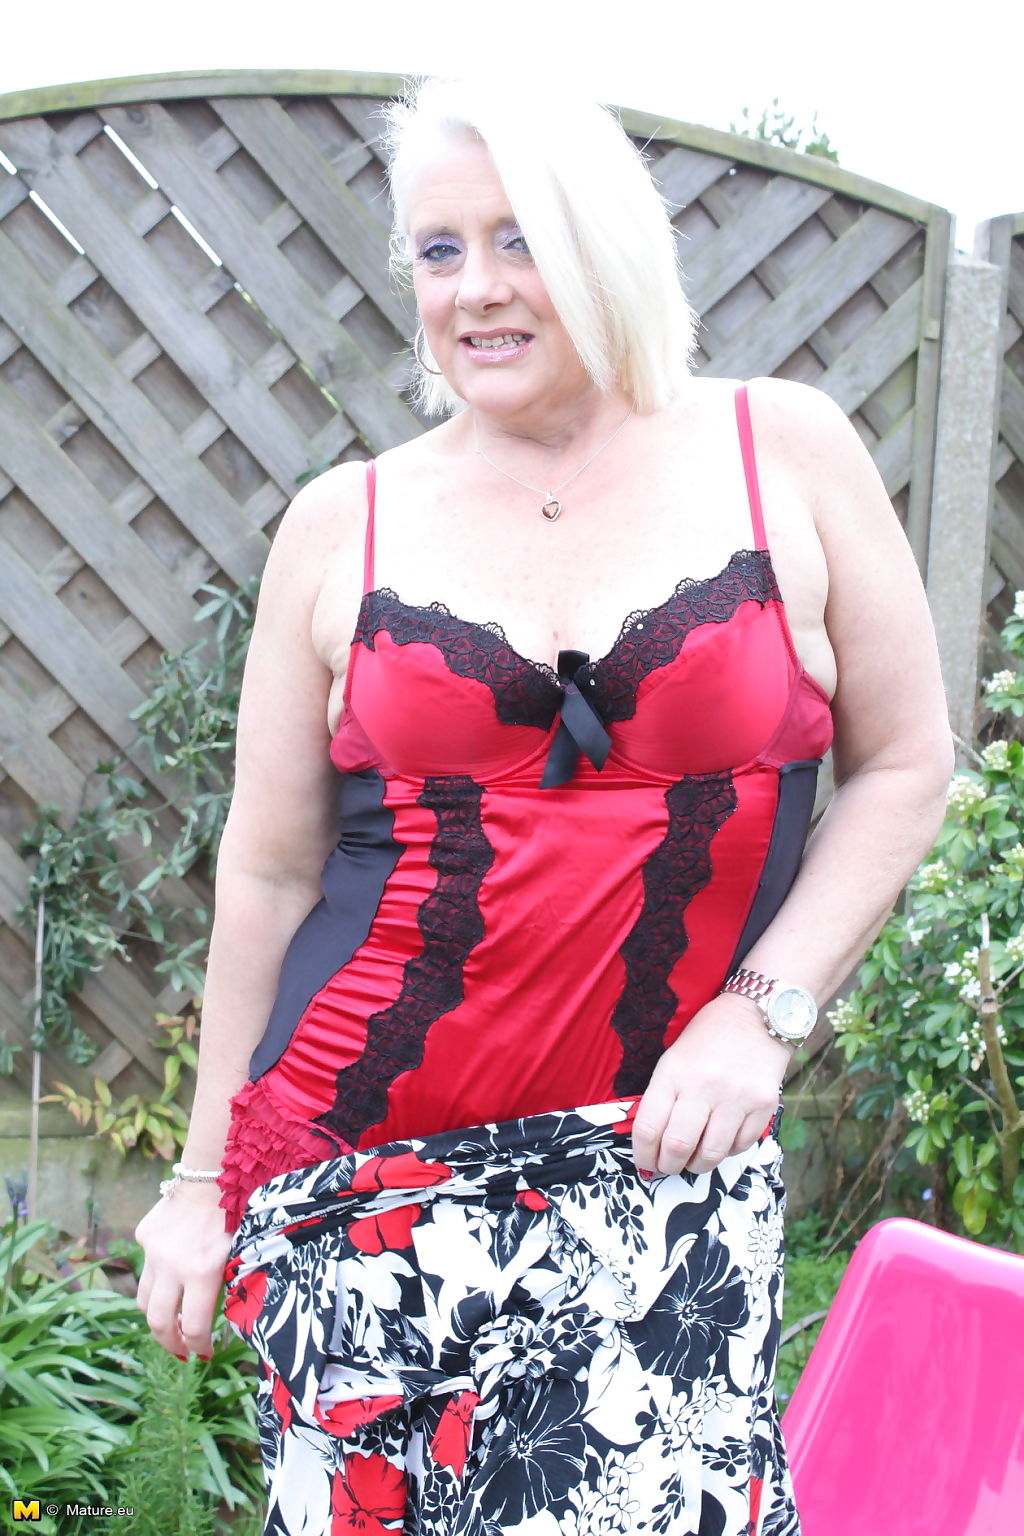 Naughty british housewife getting dirty in the garden - part 3460 page 1